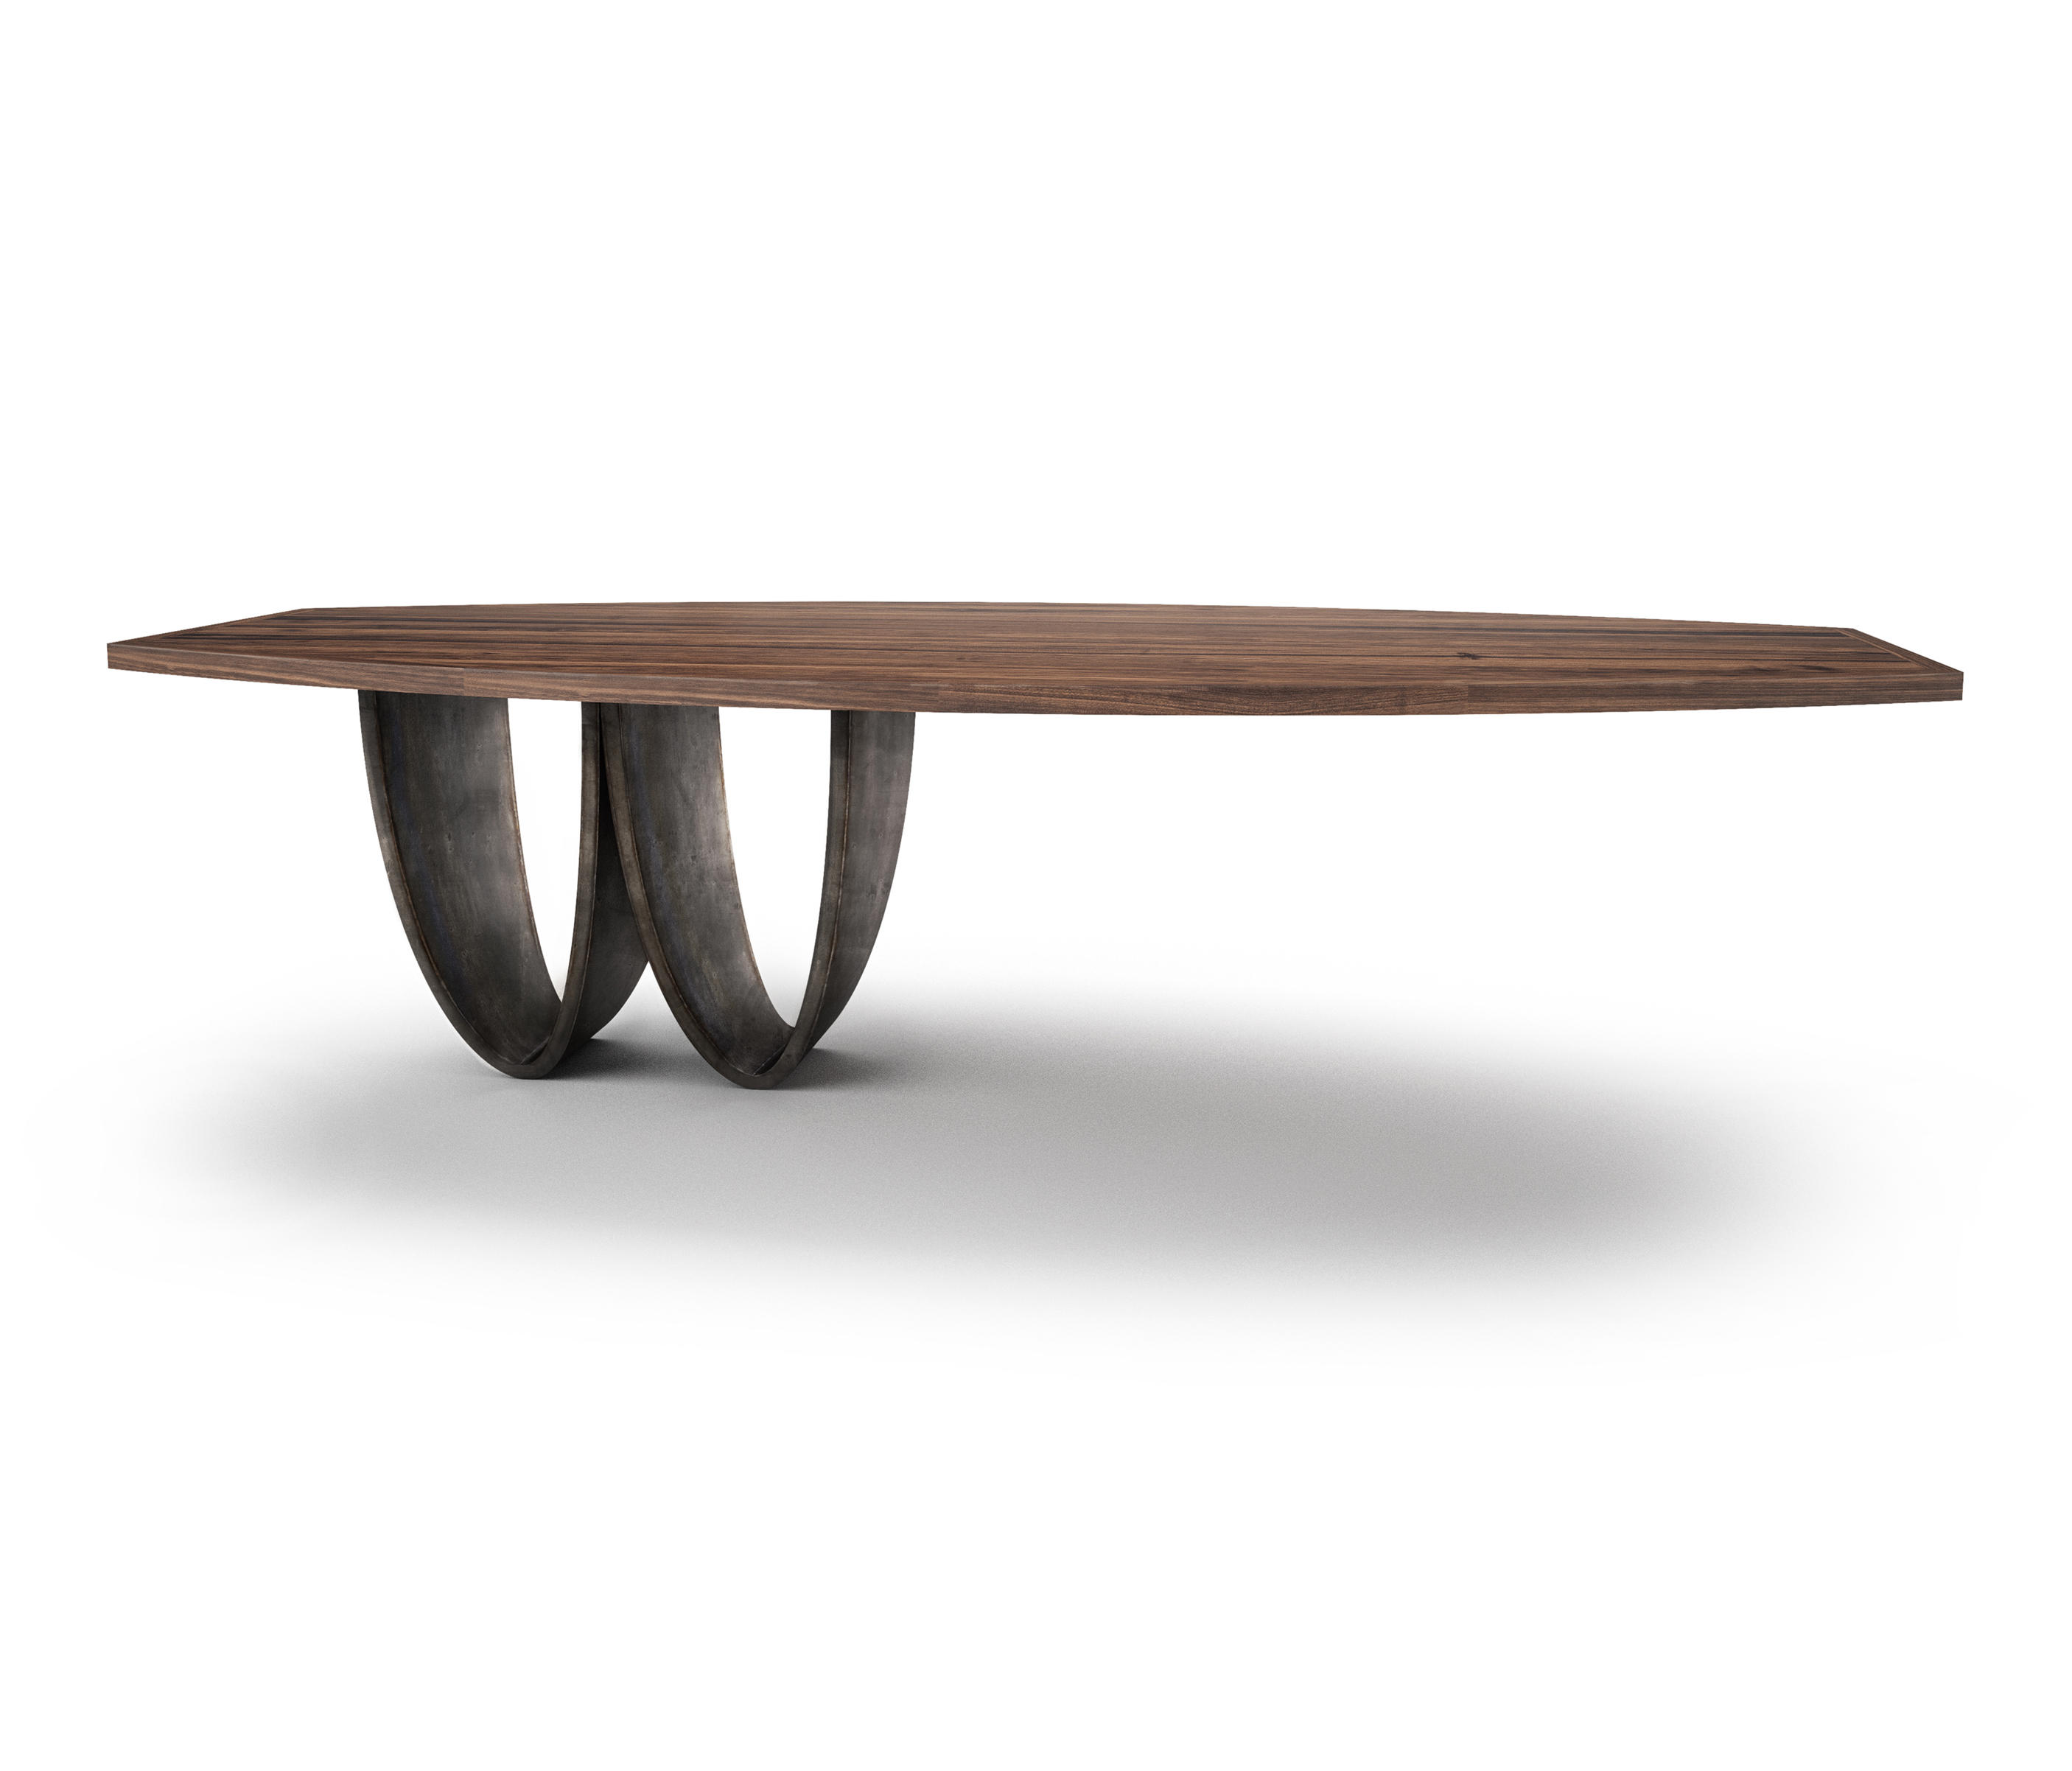 BOWI Table by Belfakto